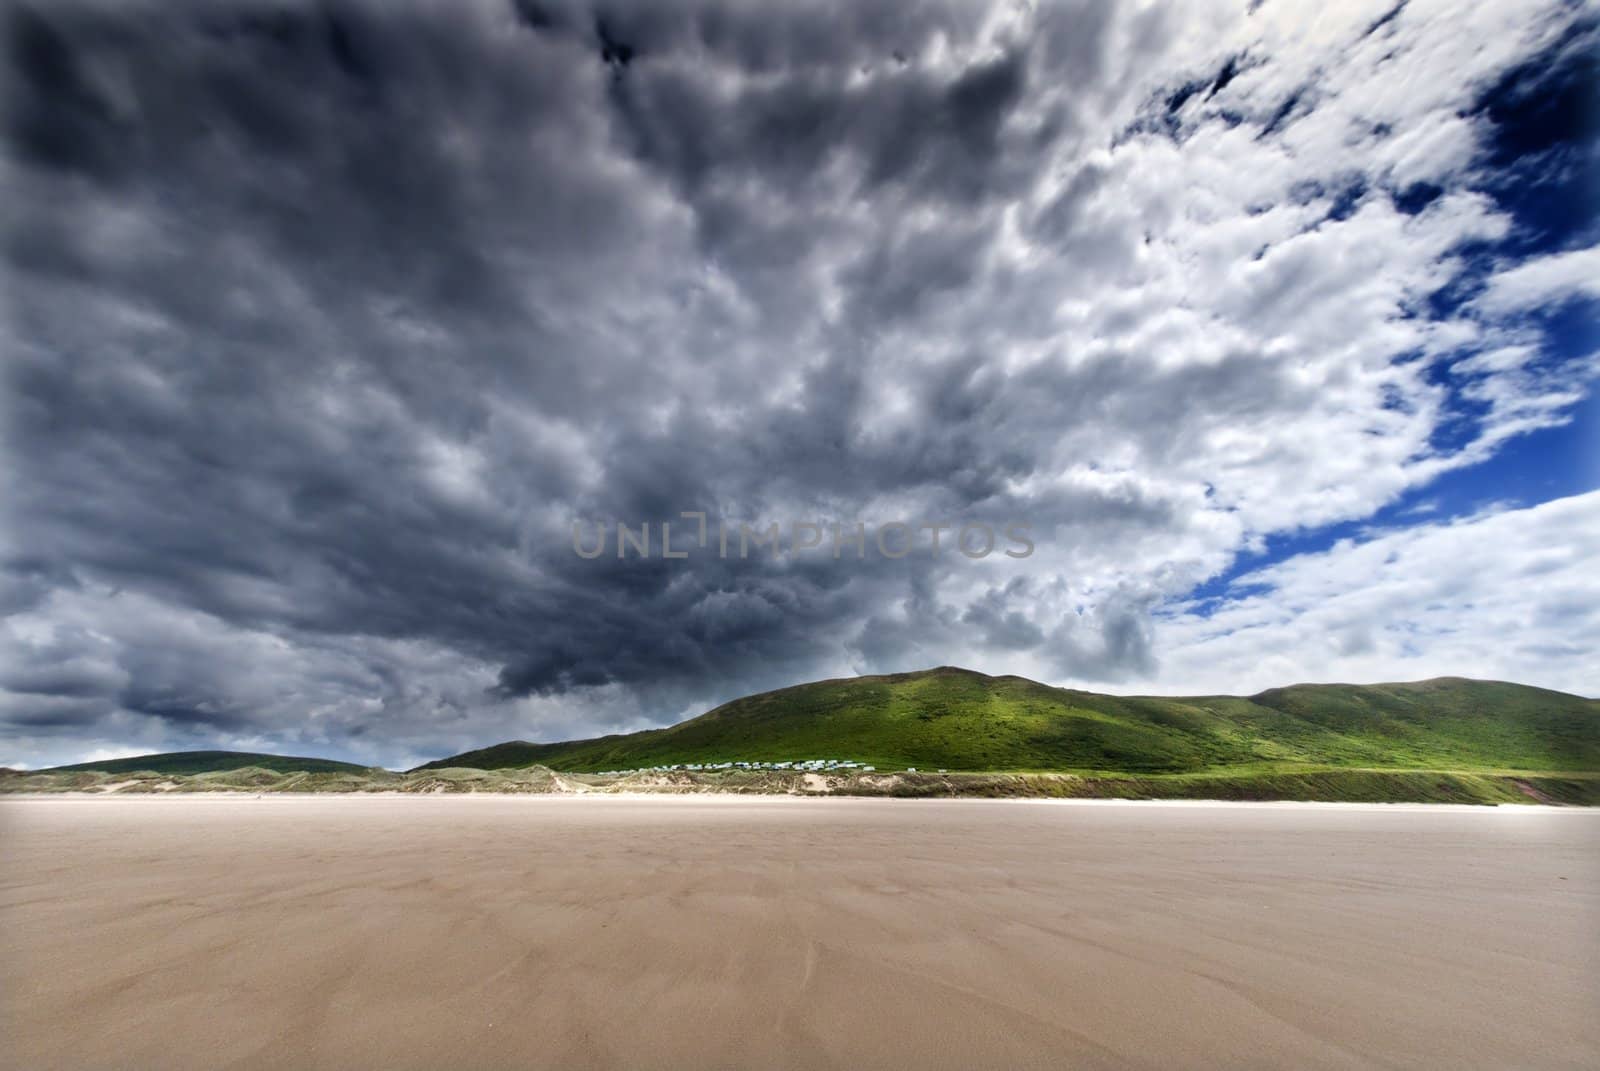 moody skies over deserted yellow sandy beach, gower wales by itsrich